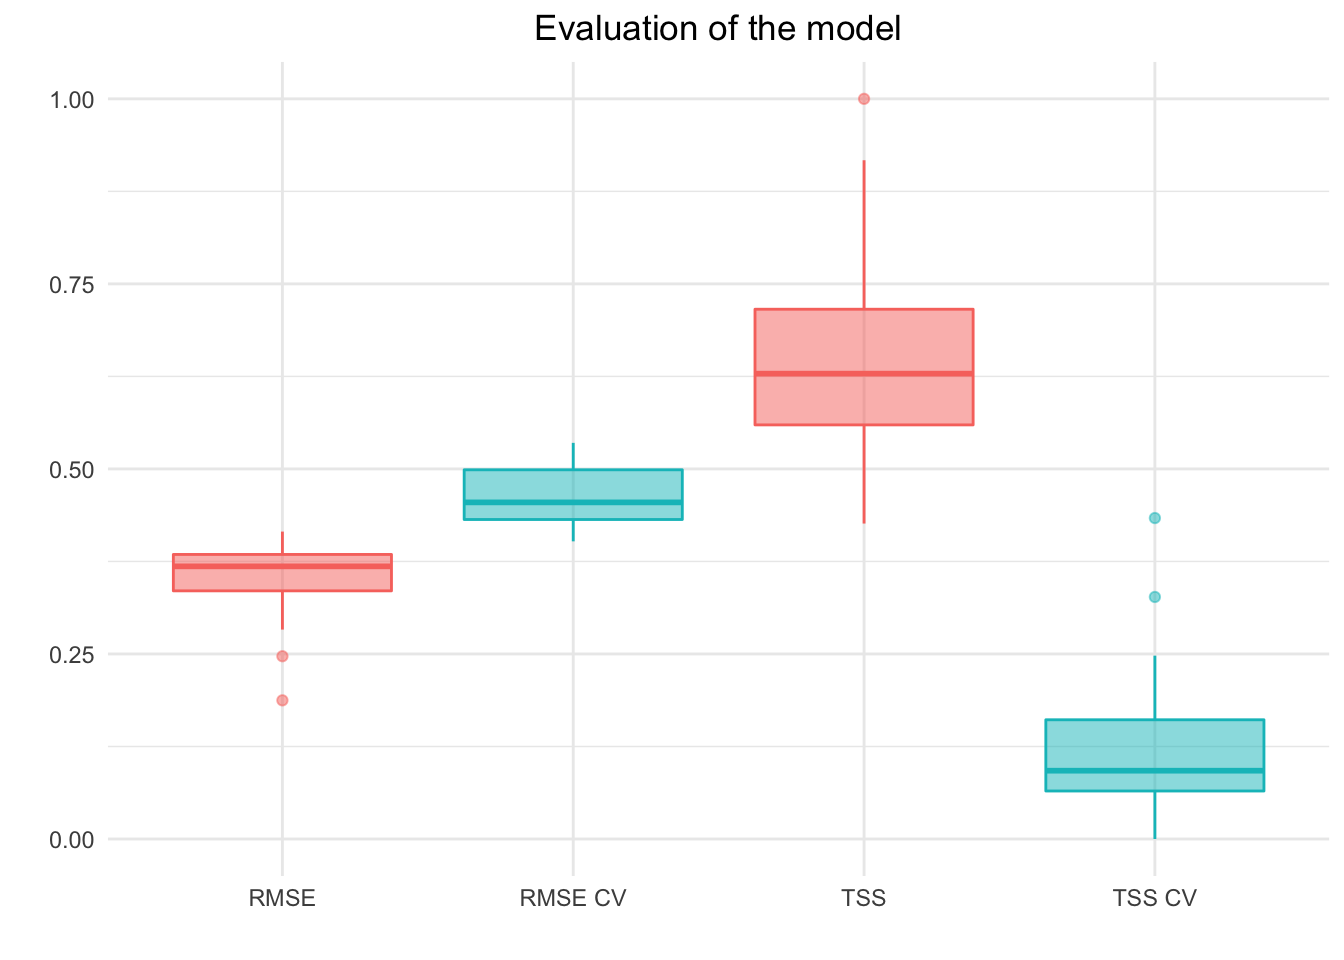 Distribution of TSS and RMSE score across species for in-sample pre-diction (red) and 2-fold cross-validation (blue).